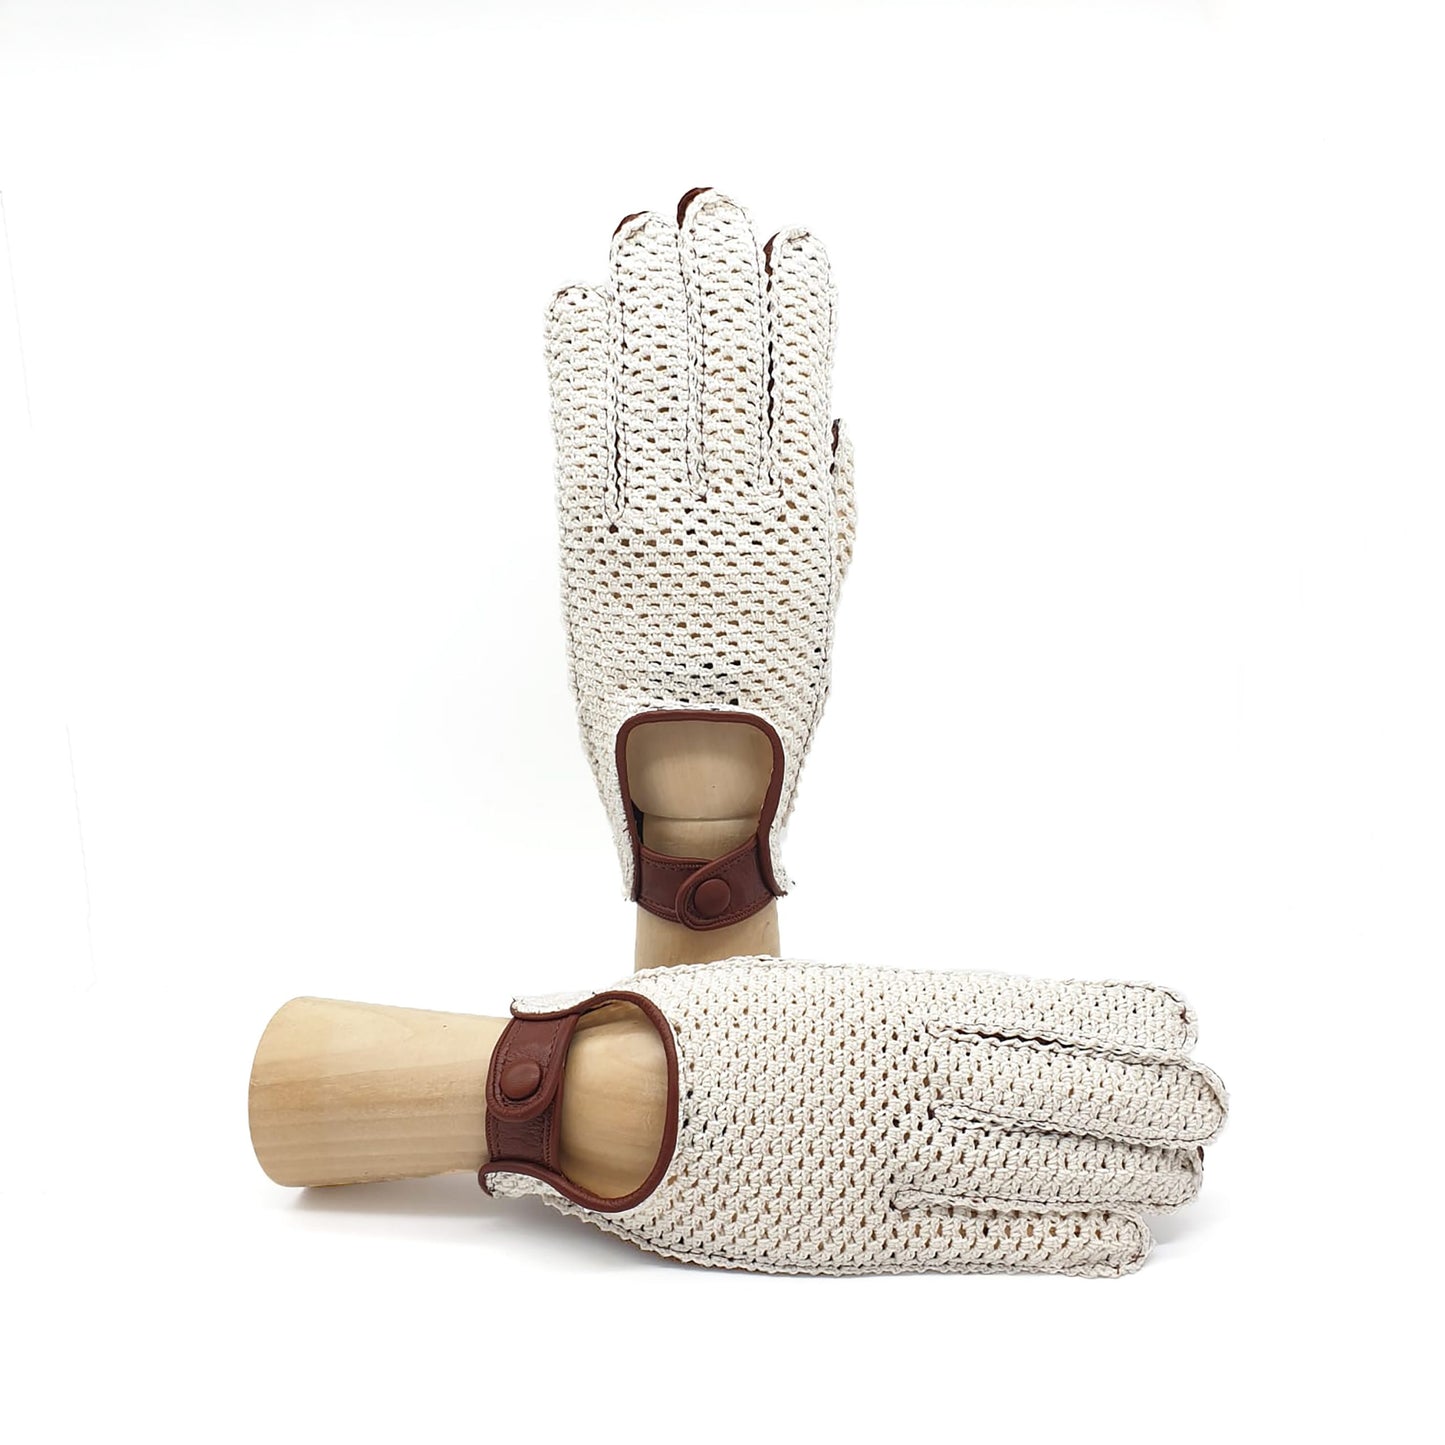 Men's cognac leather driving gloves with crochet top